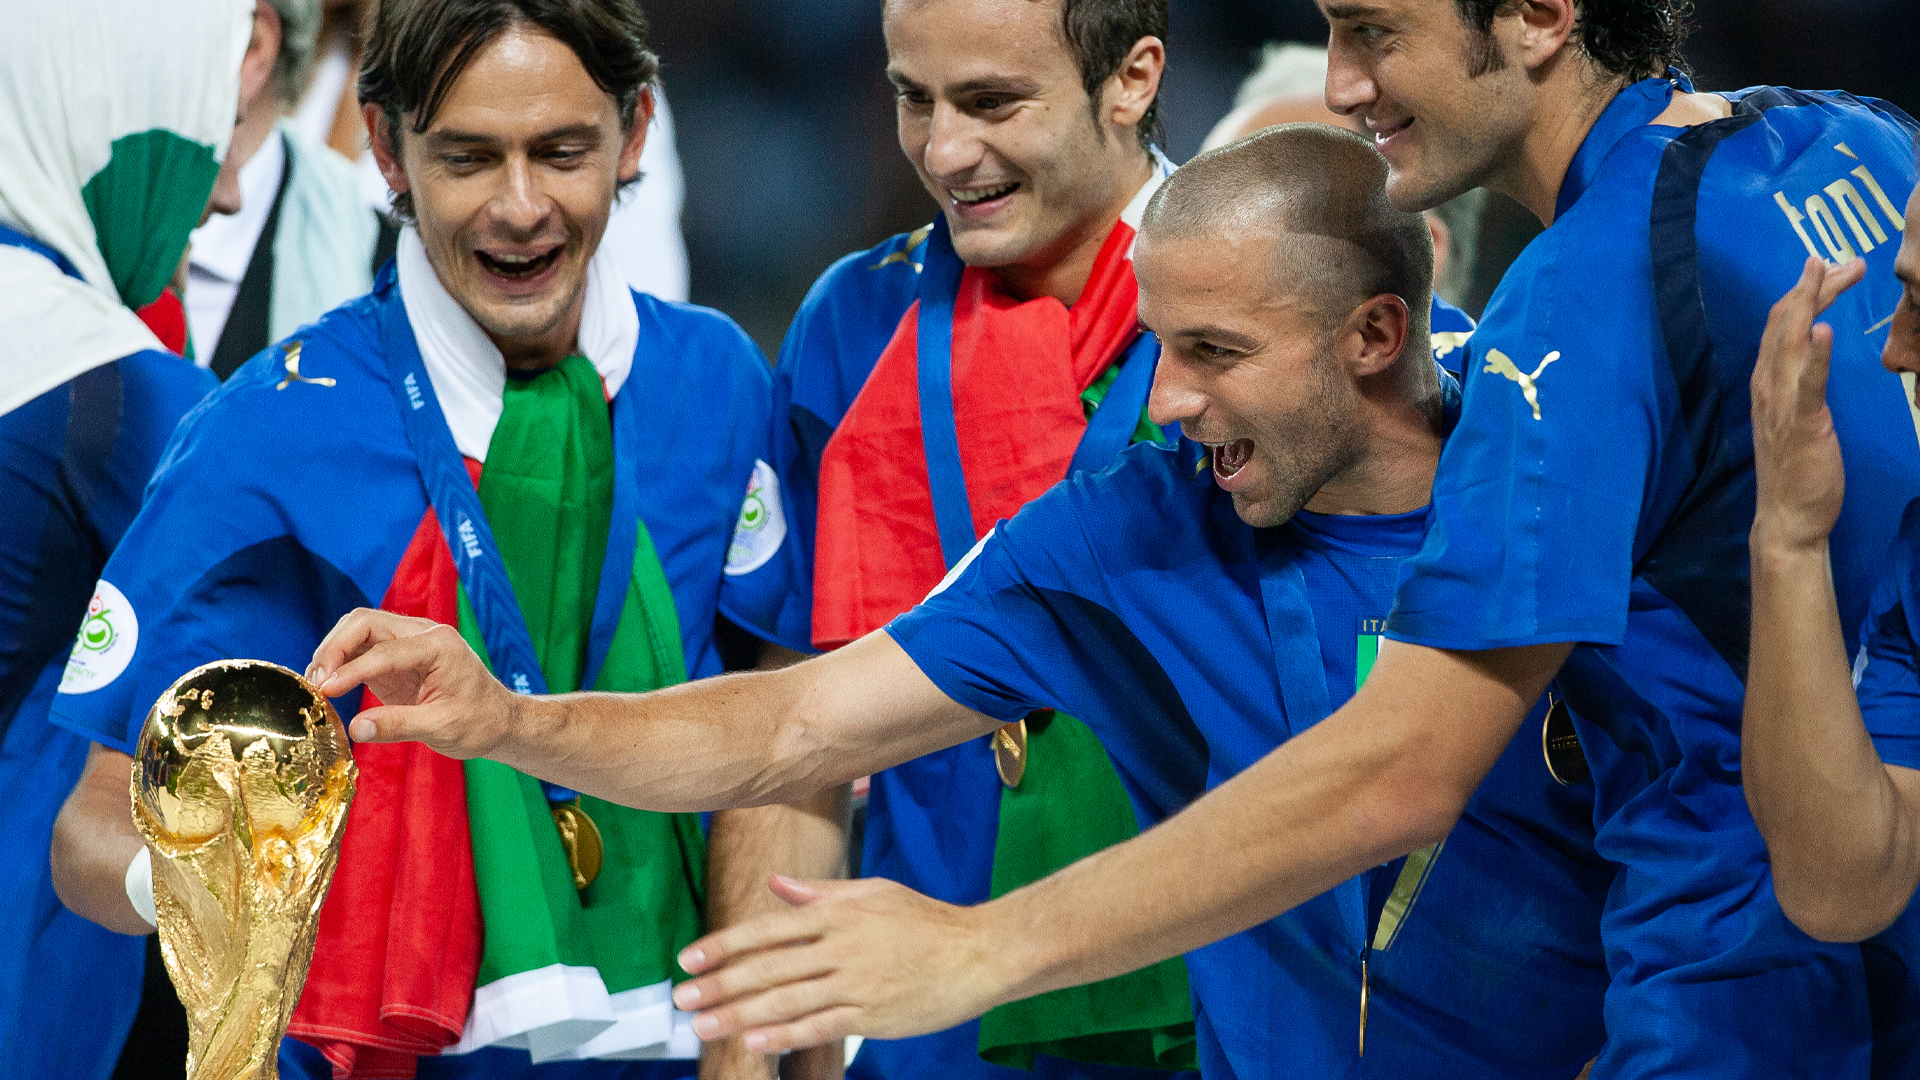 2006 World Cup: Italy's Fourth Title While Zidane Loses It